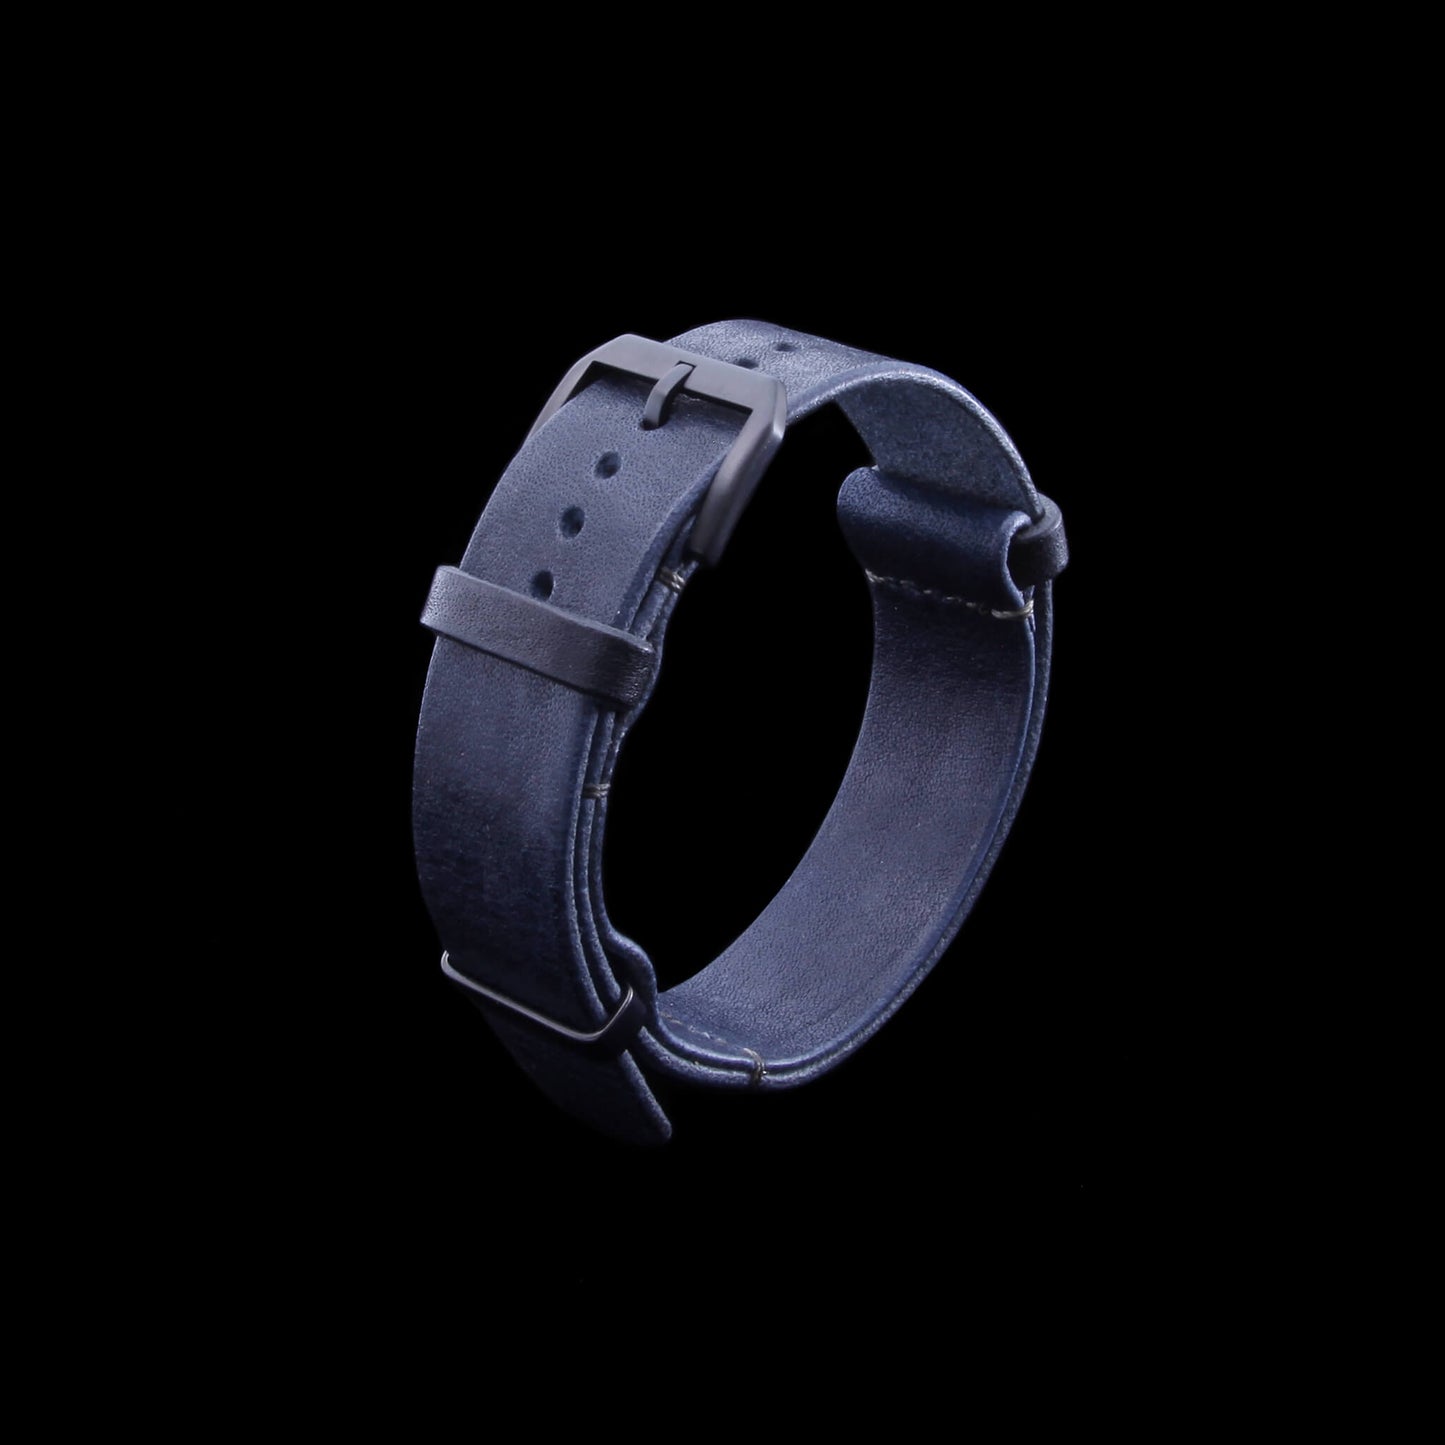 2nd View of NAT2 Stylish Leather Watch Strap, Vintage 407 navy blue fitted with black PVD slim buckle , made with full grain Italian veg-tanned leather by Cozy Handmade